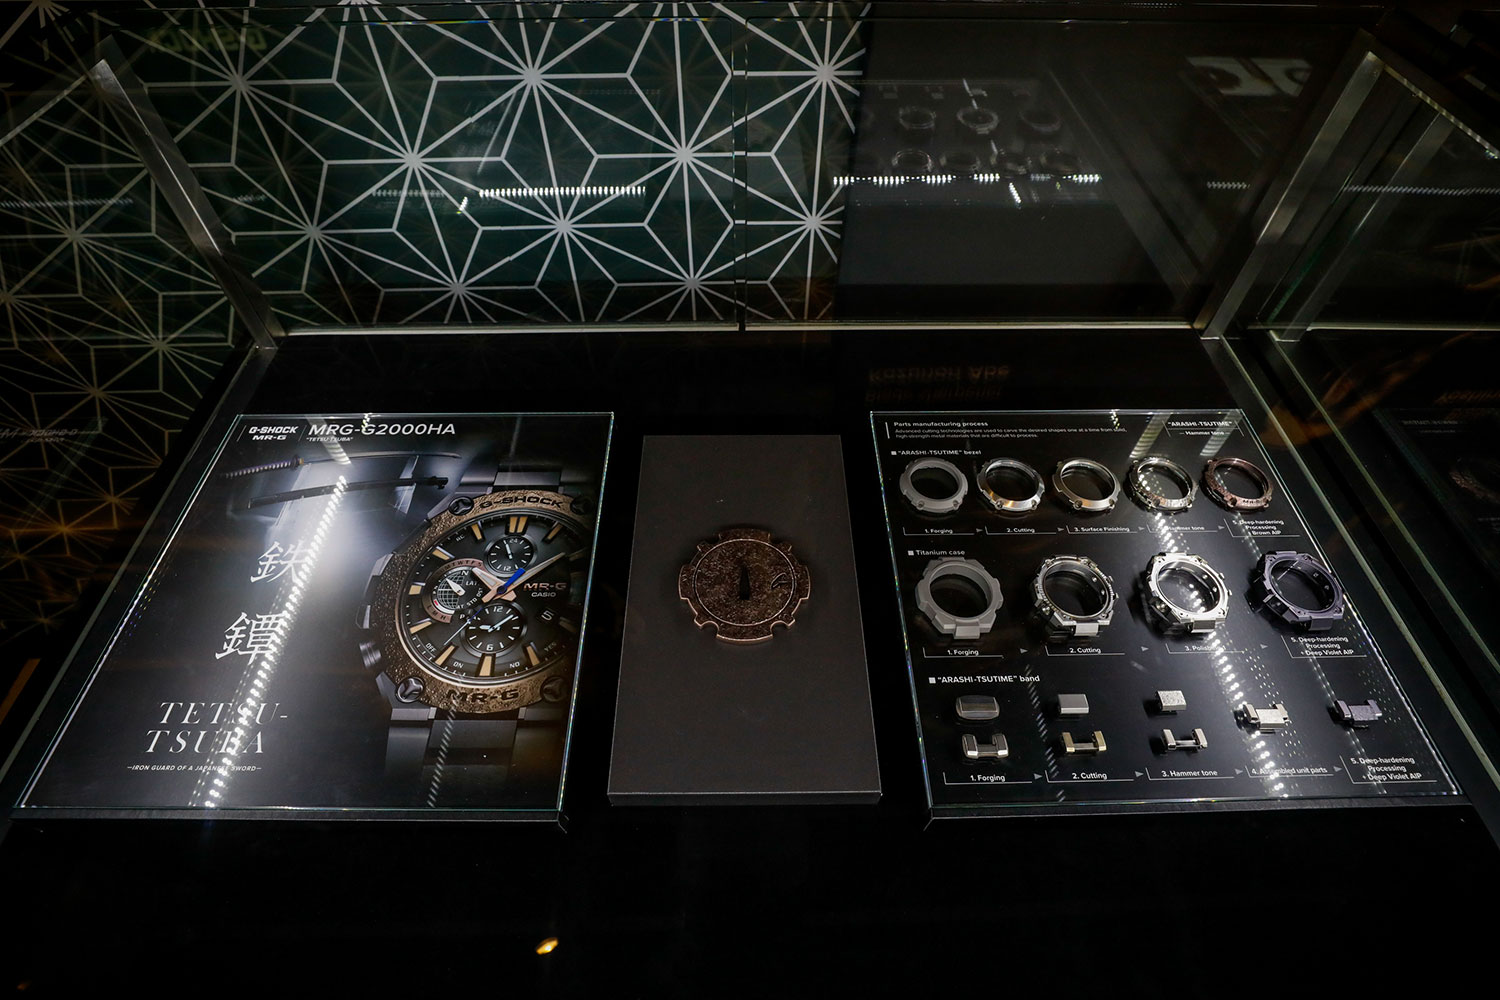 Special G-SHOCK Pop-up Boutique at Cortina Watch, Mandarin Gallery